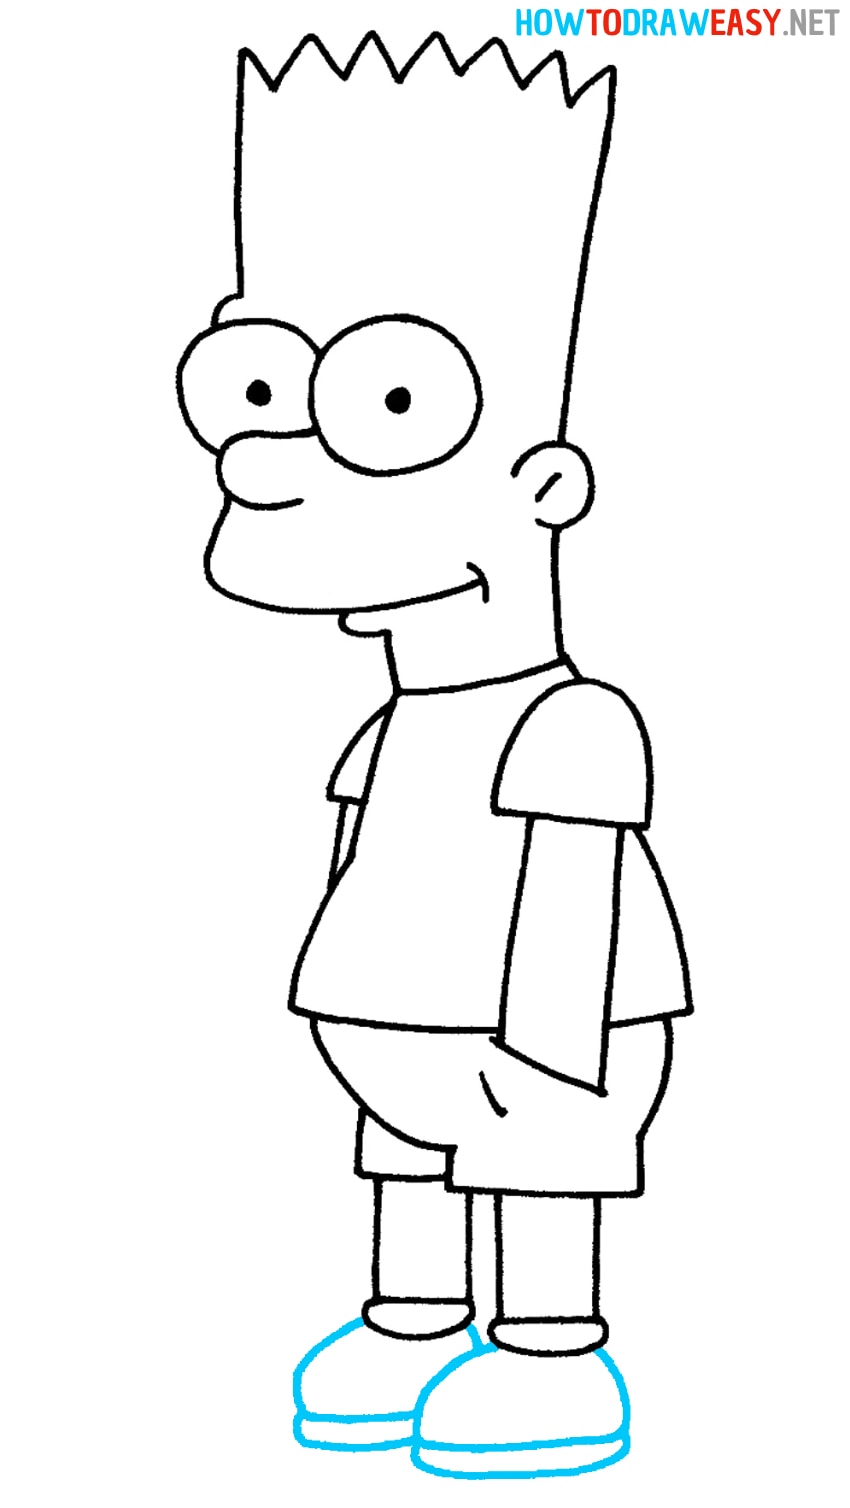 How to Draw an Easy Bart Simpson